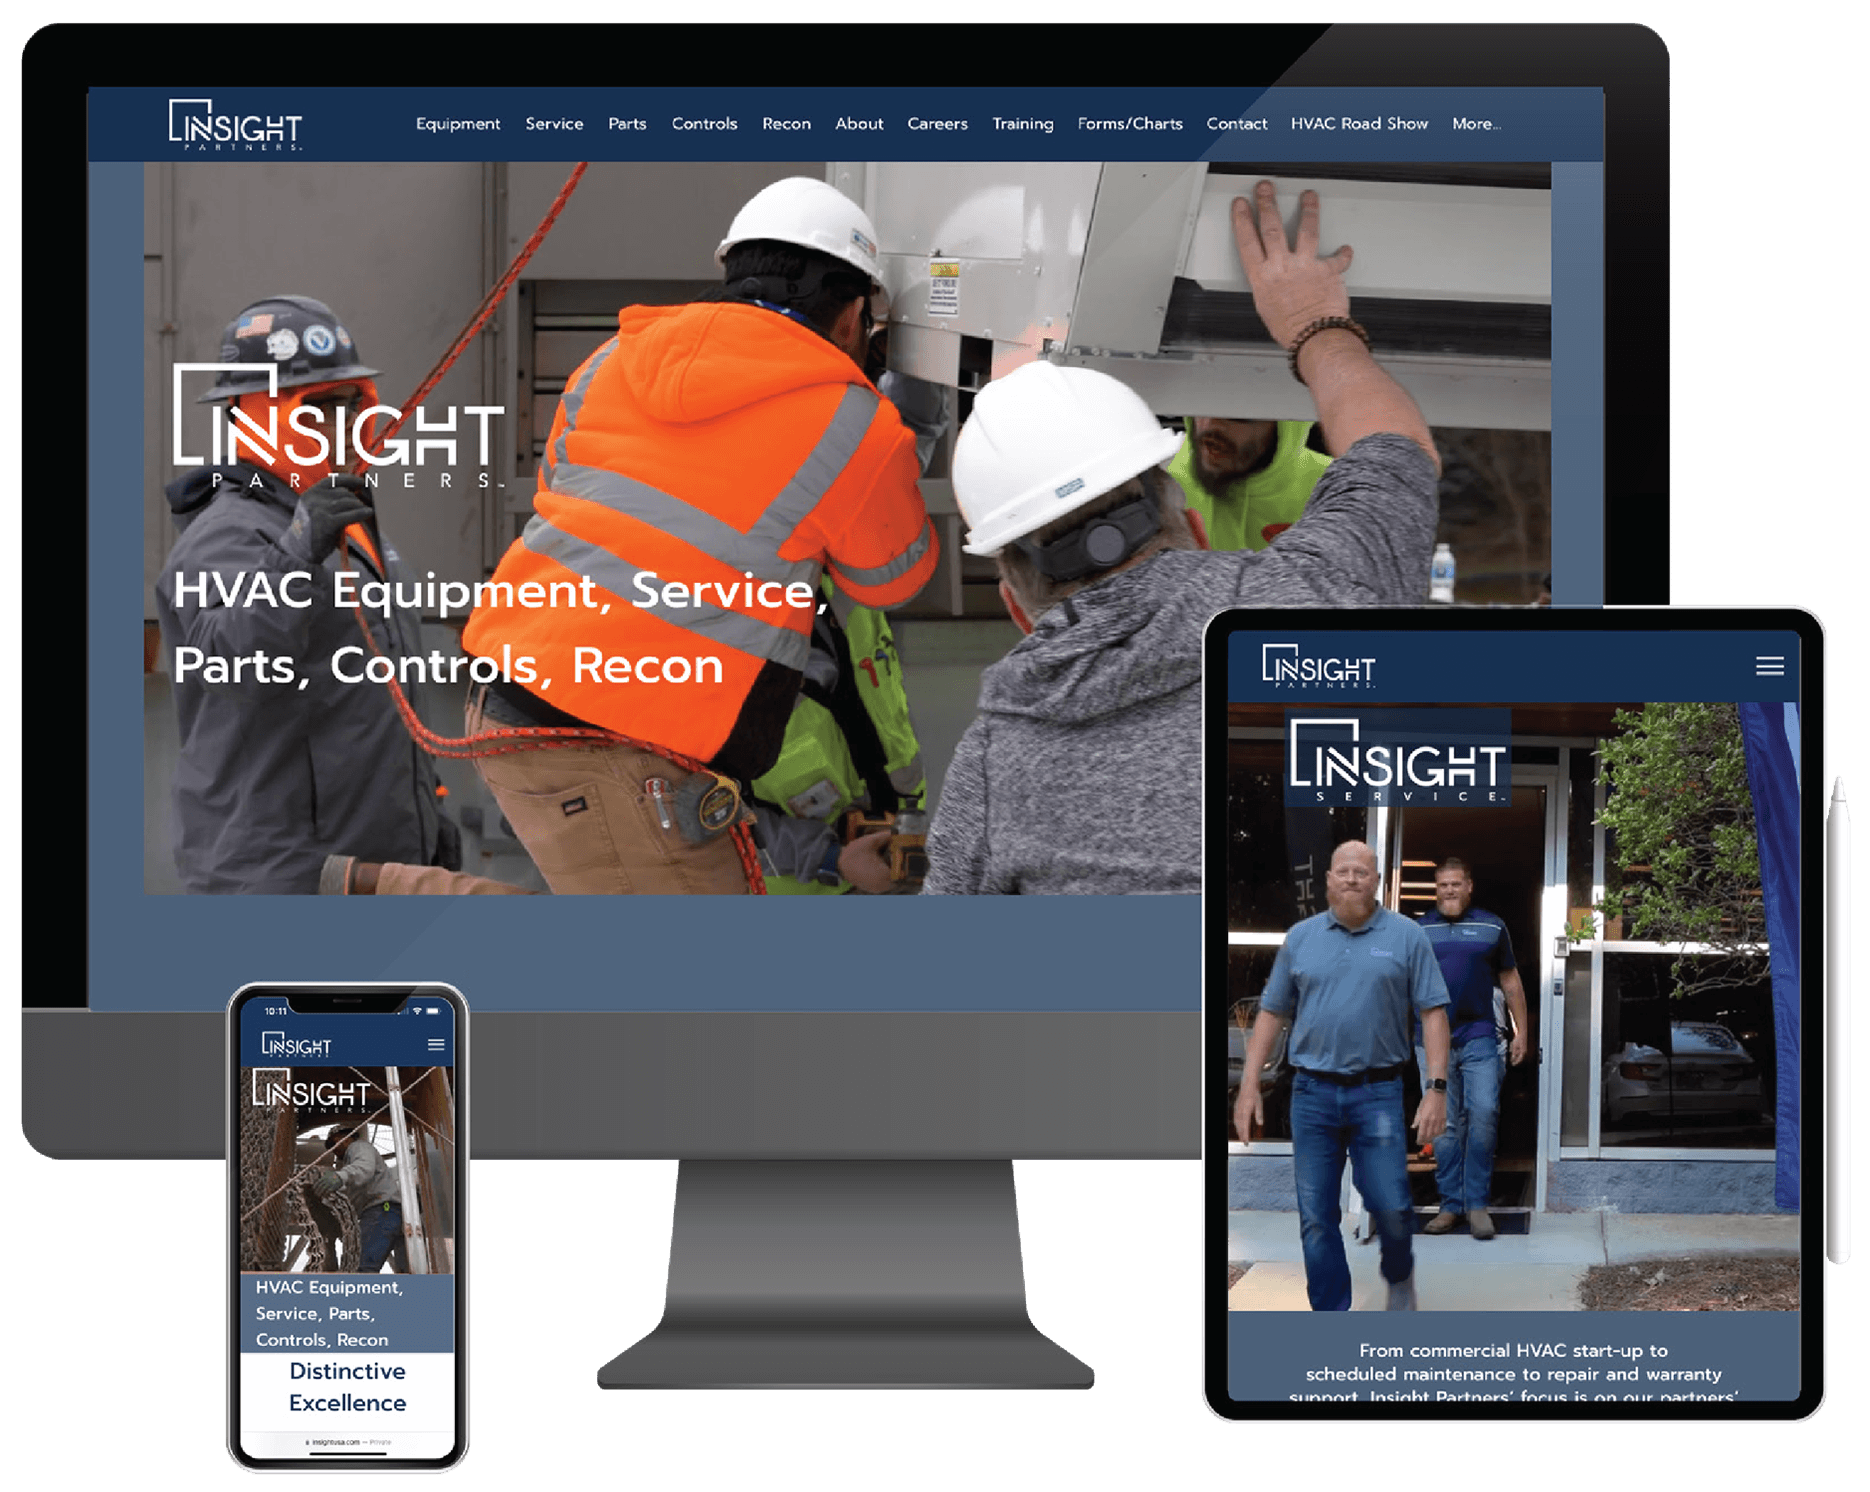 A photo of the Insight Partners' website